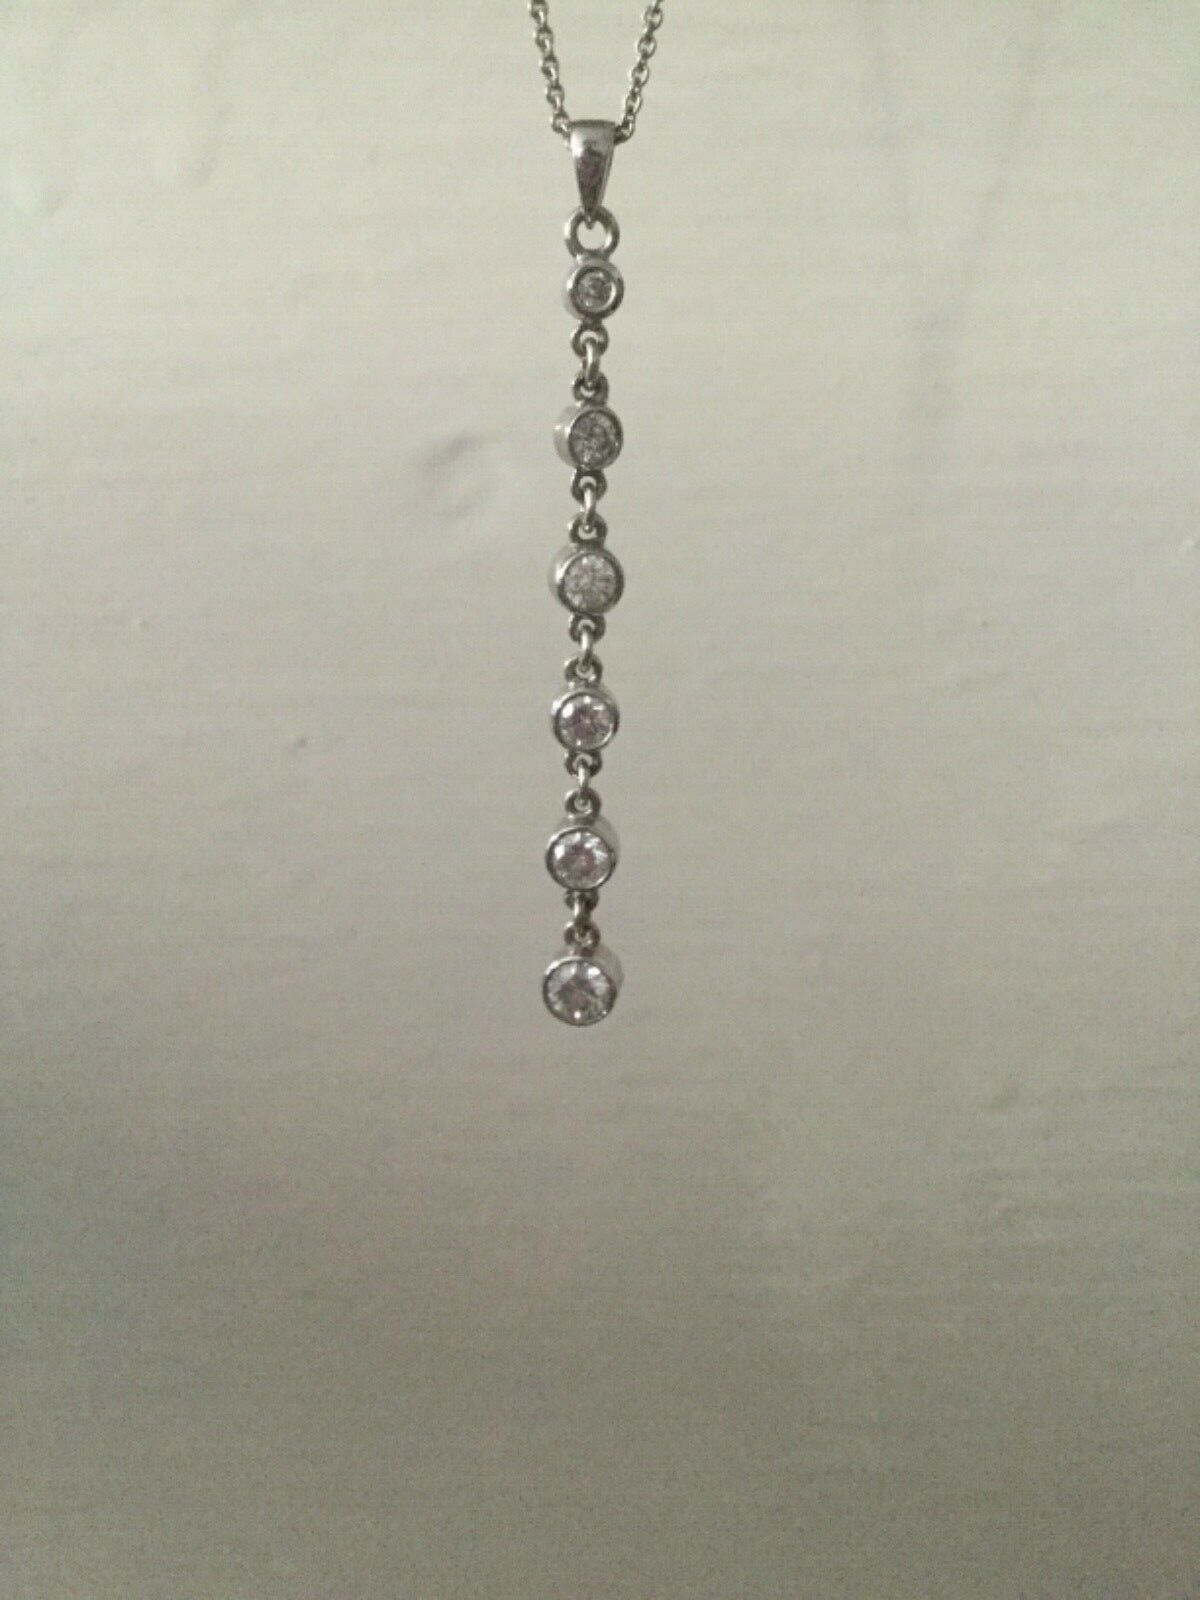 18ct White Gold Necklace with .80ct - 1.00ct approx VS1 Diamond Journey Pendant